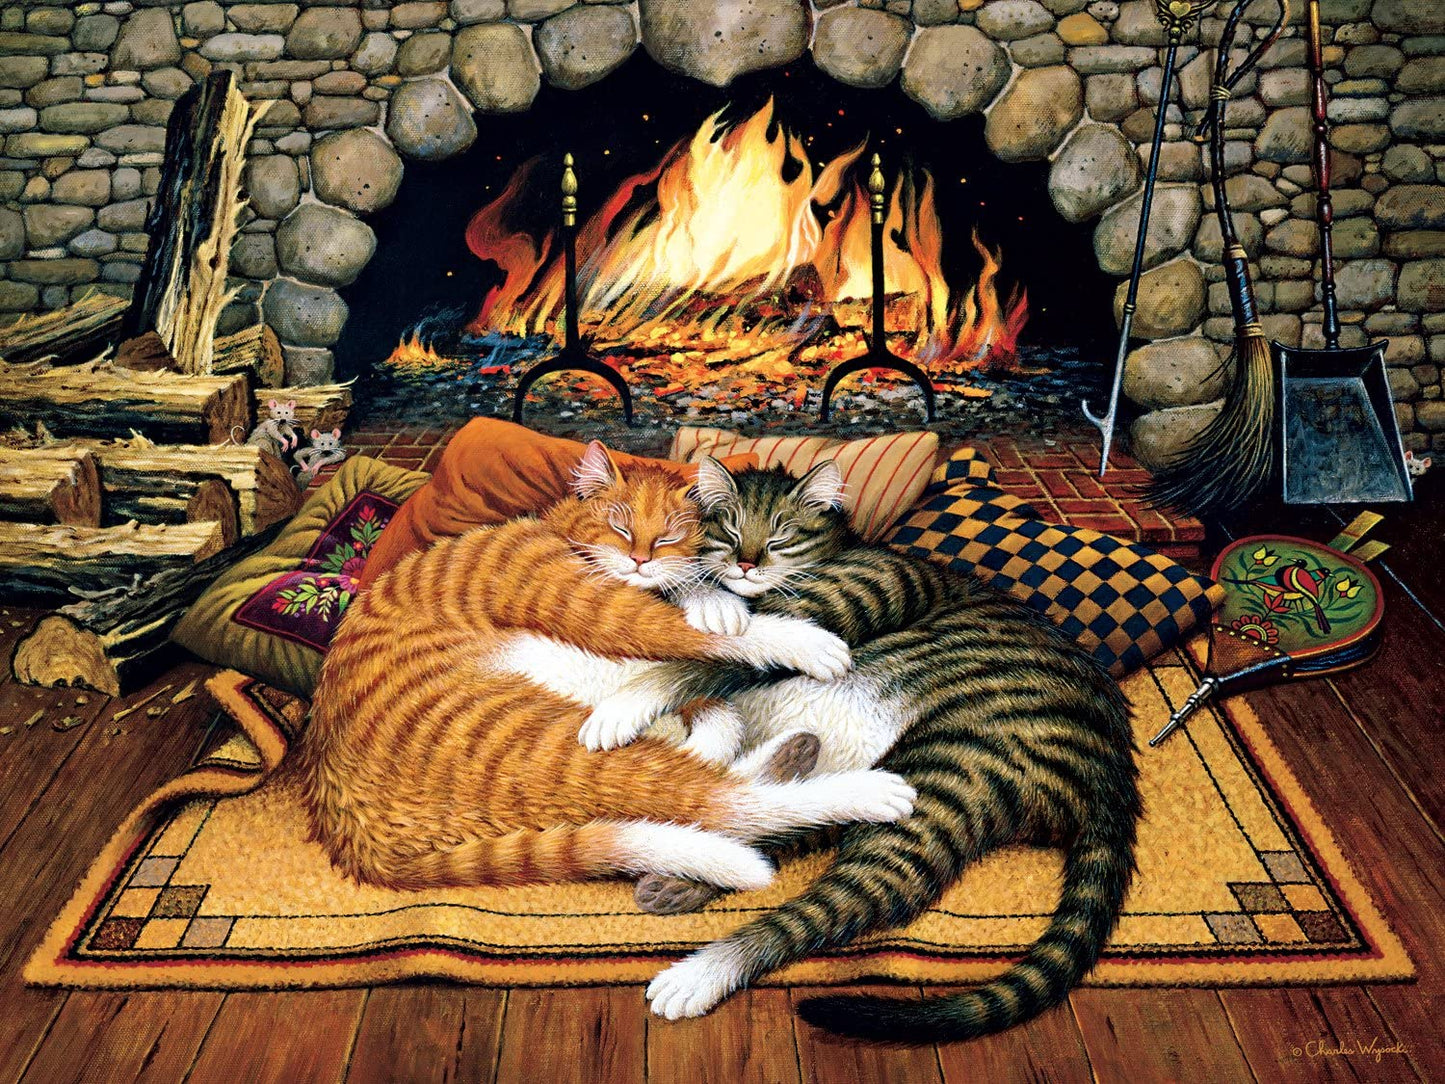 🔥LAST DAY 80% OFF-All Burned Out Wooden Jigsaw Puzzle